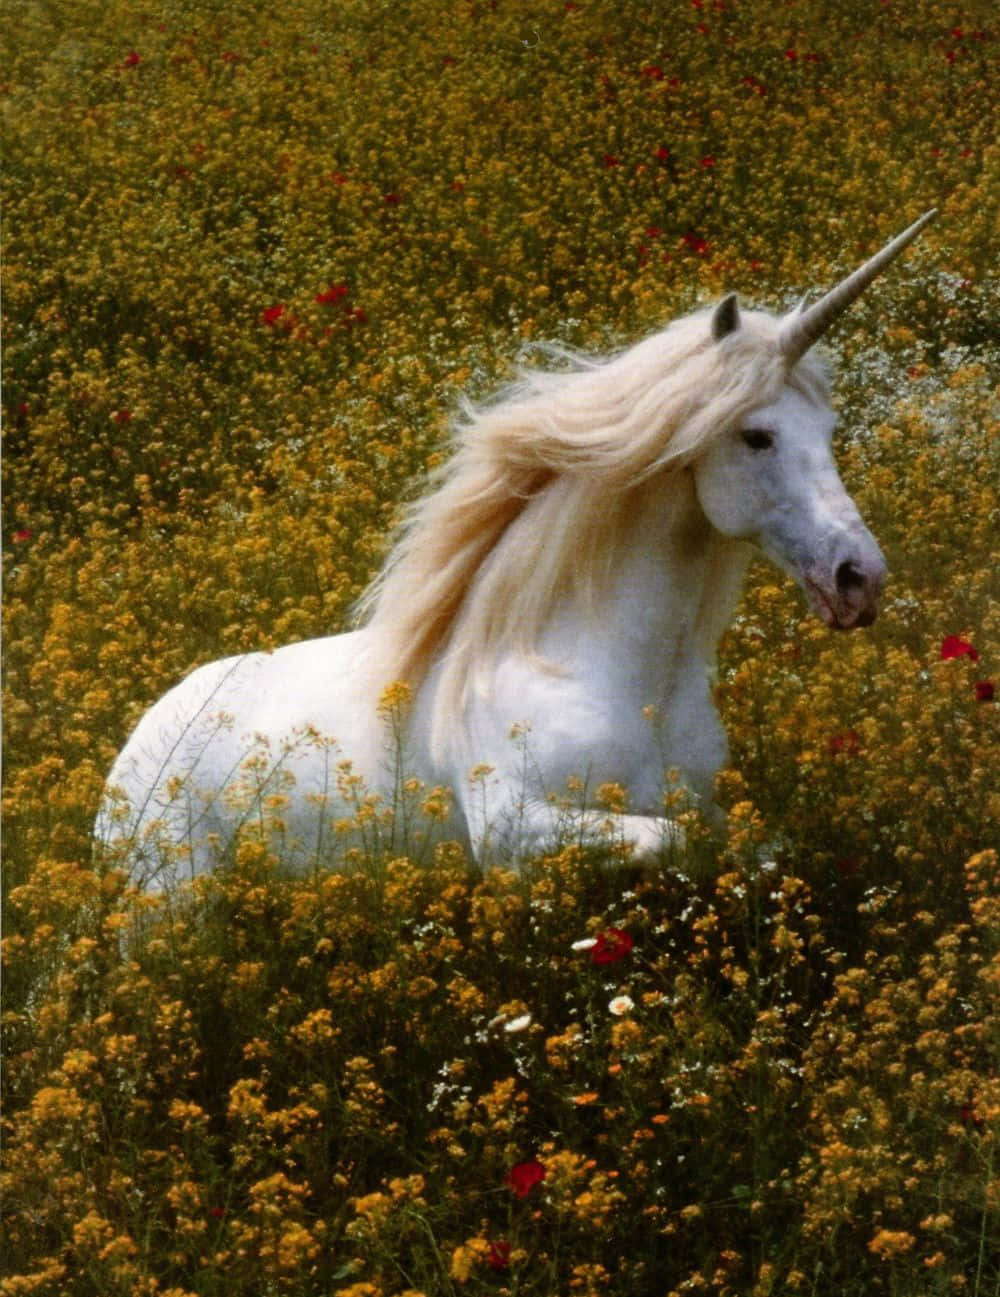 real life unicorn pictures